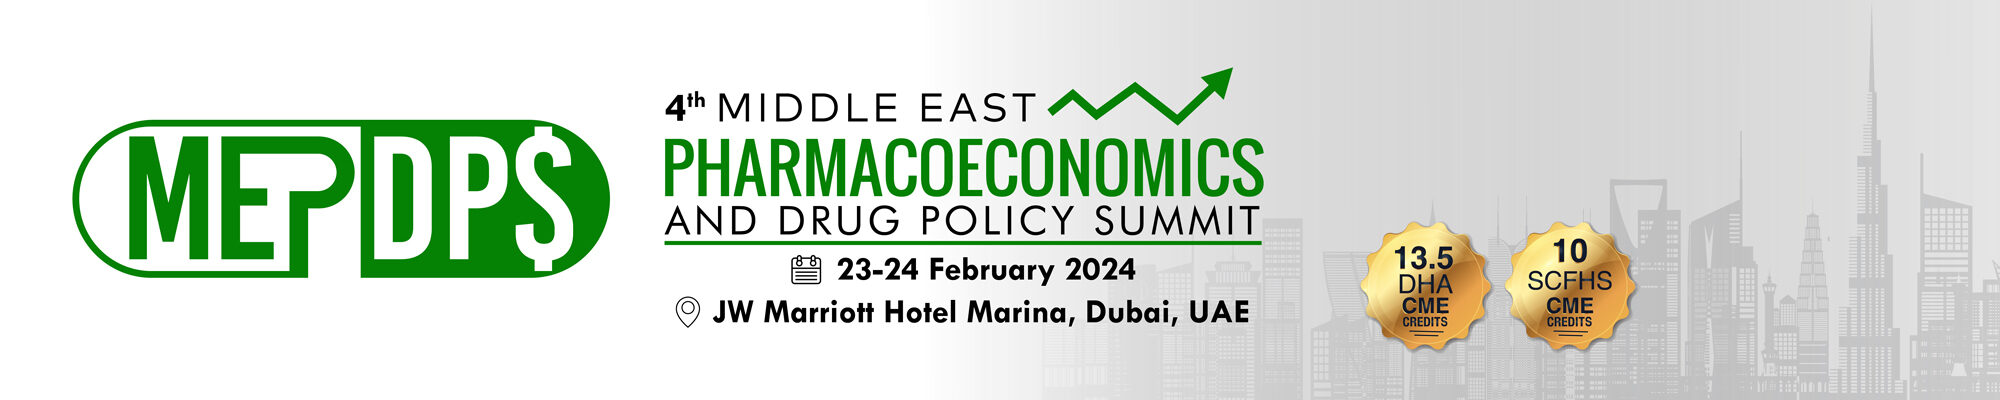 Middle East Pharmacoeconomics and Drug Policy Summit 2024